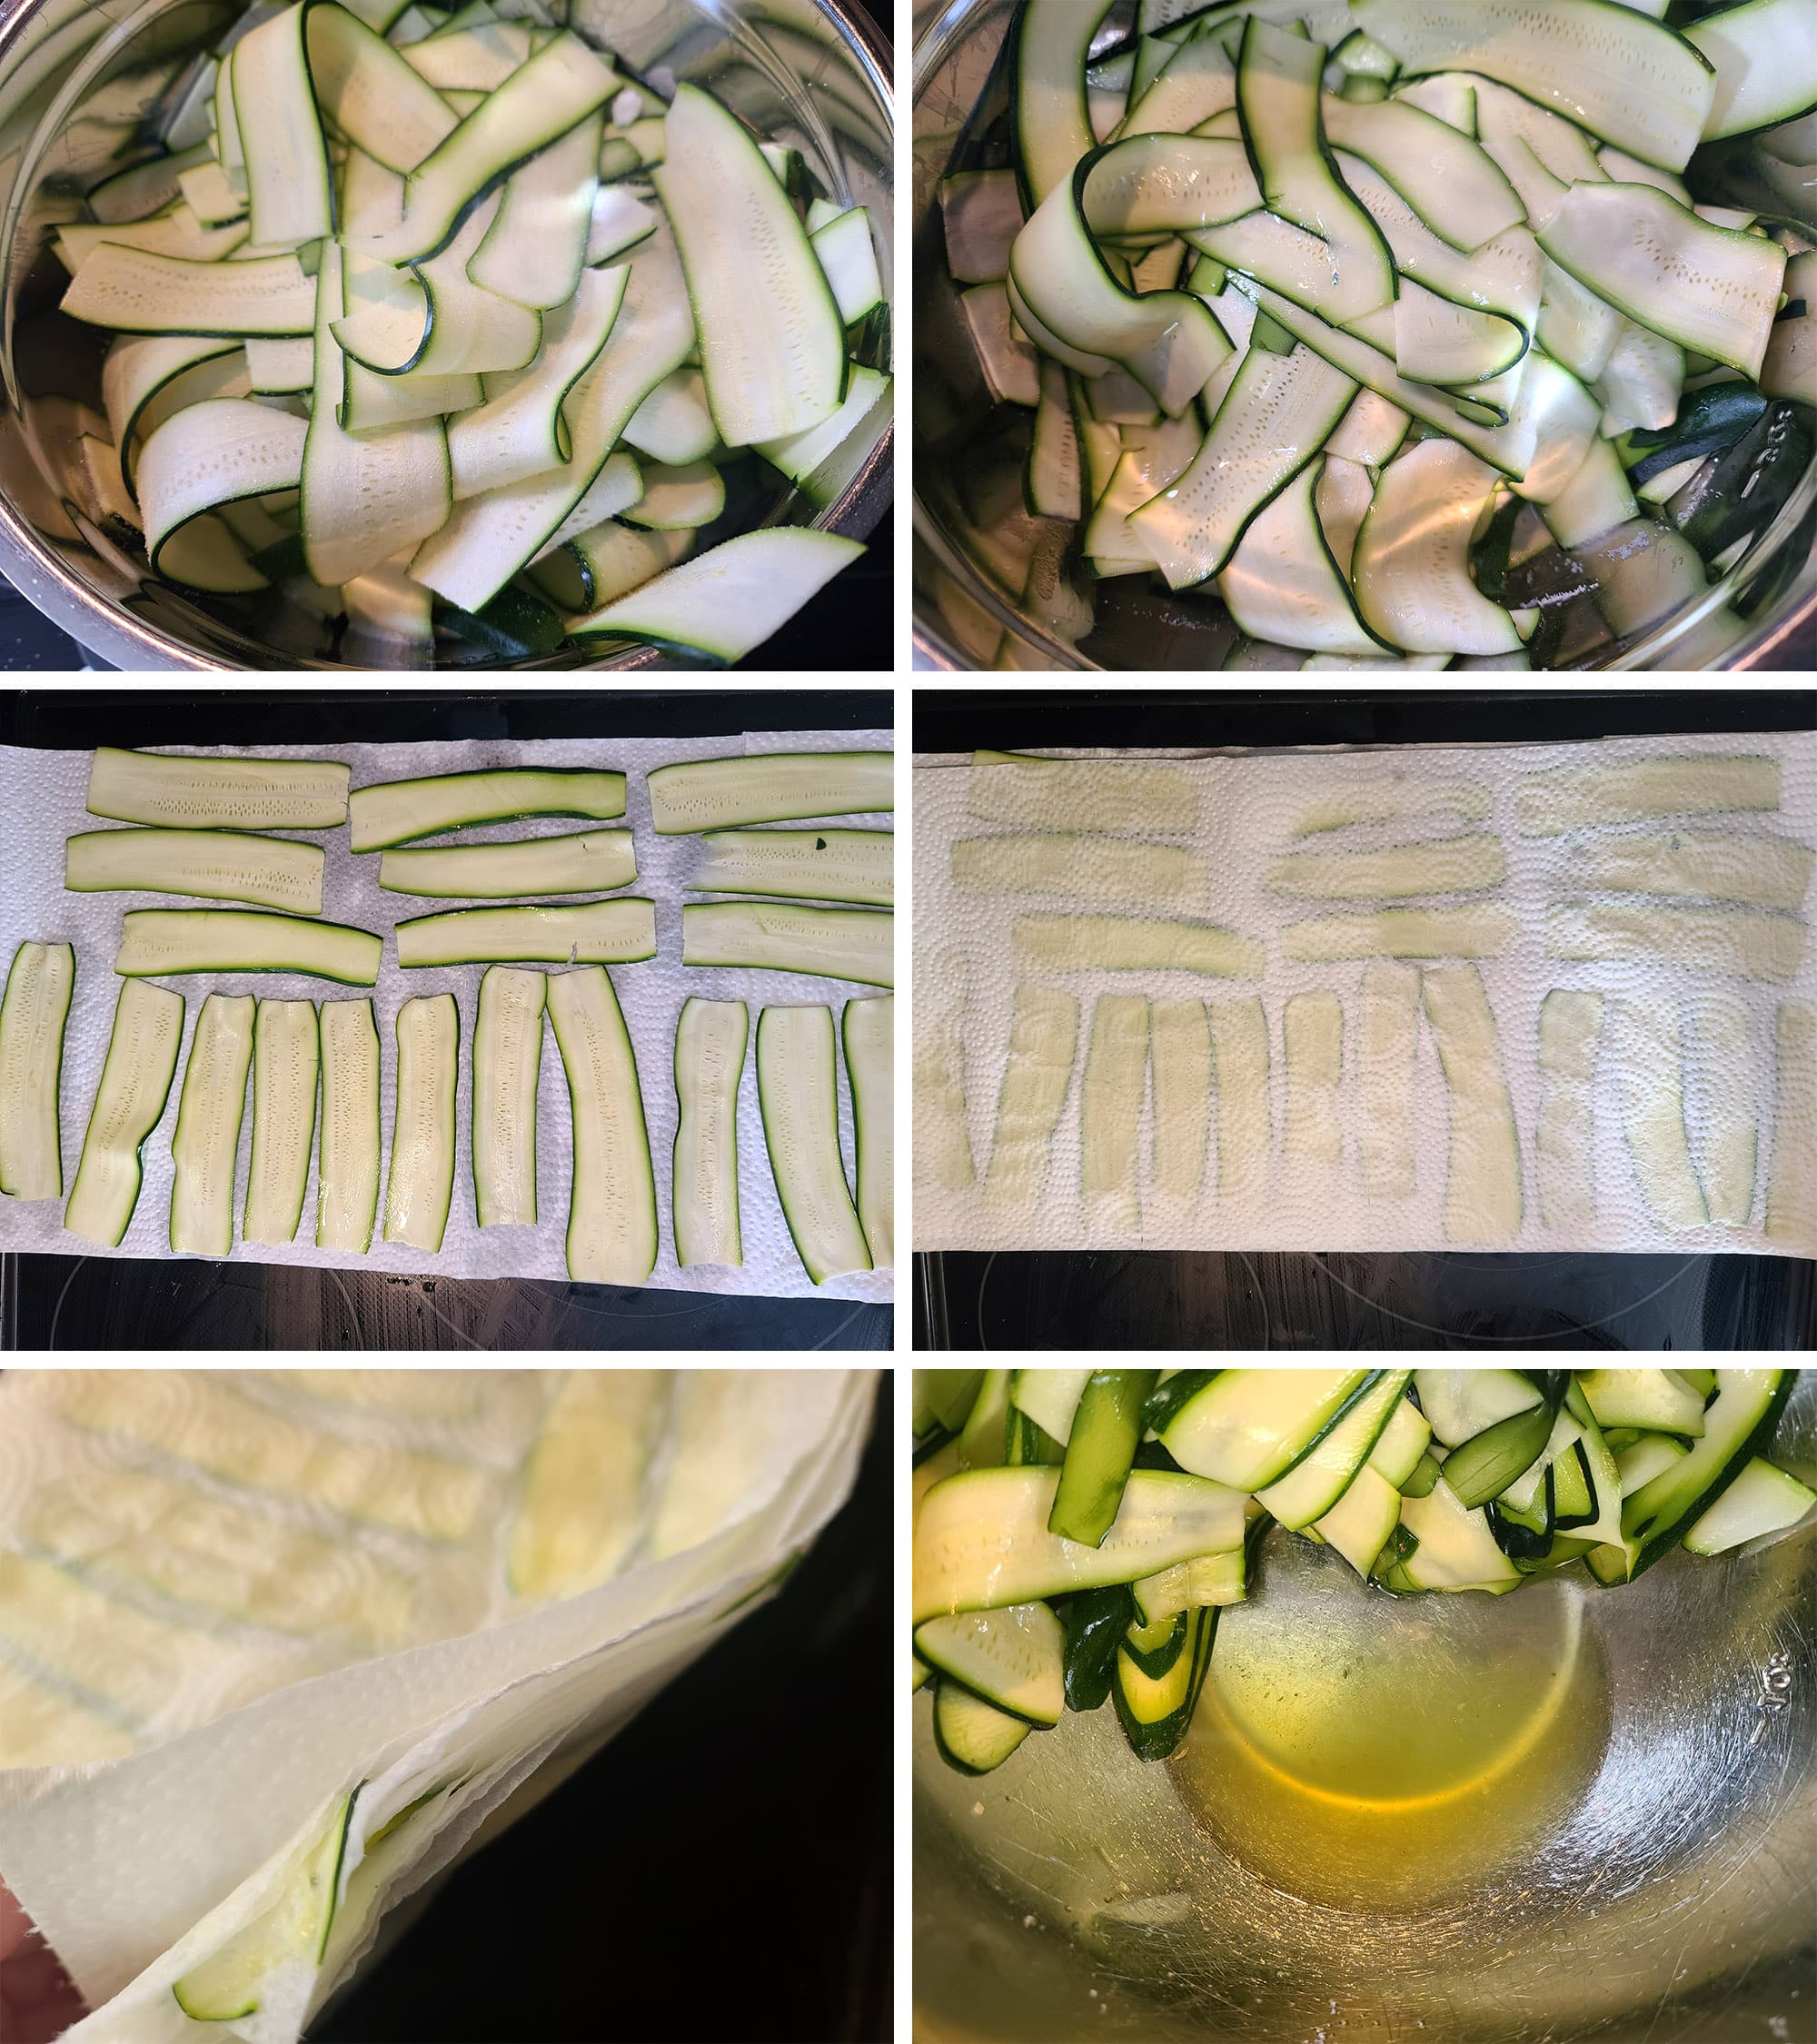 6 part image showing zucchini slices being salted in a bowl then sandwiched between paper towels.